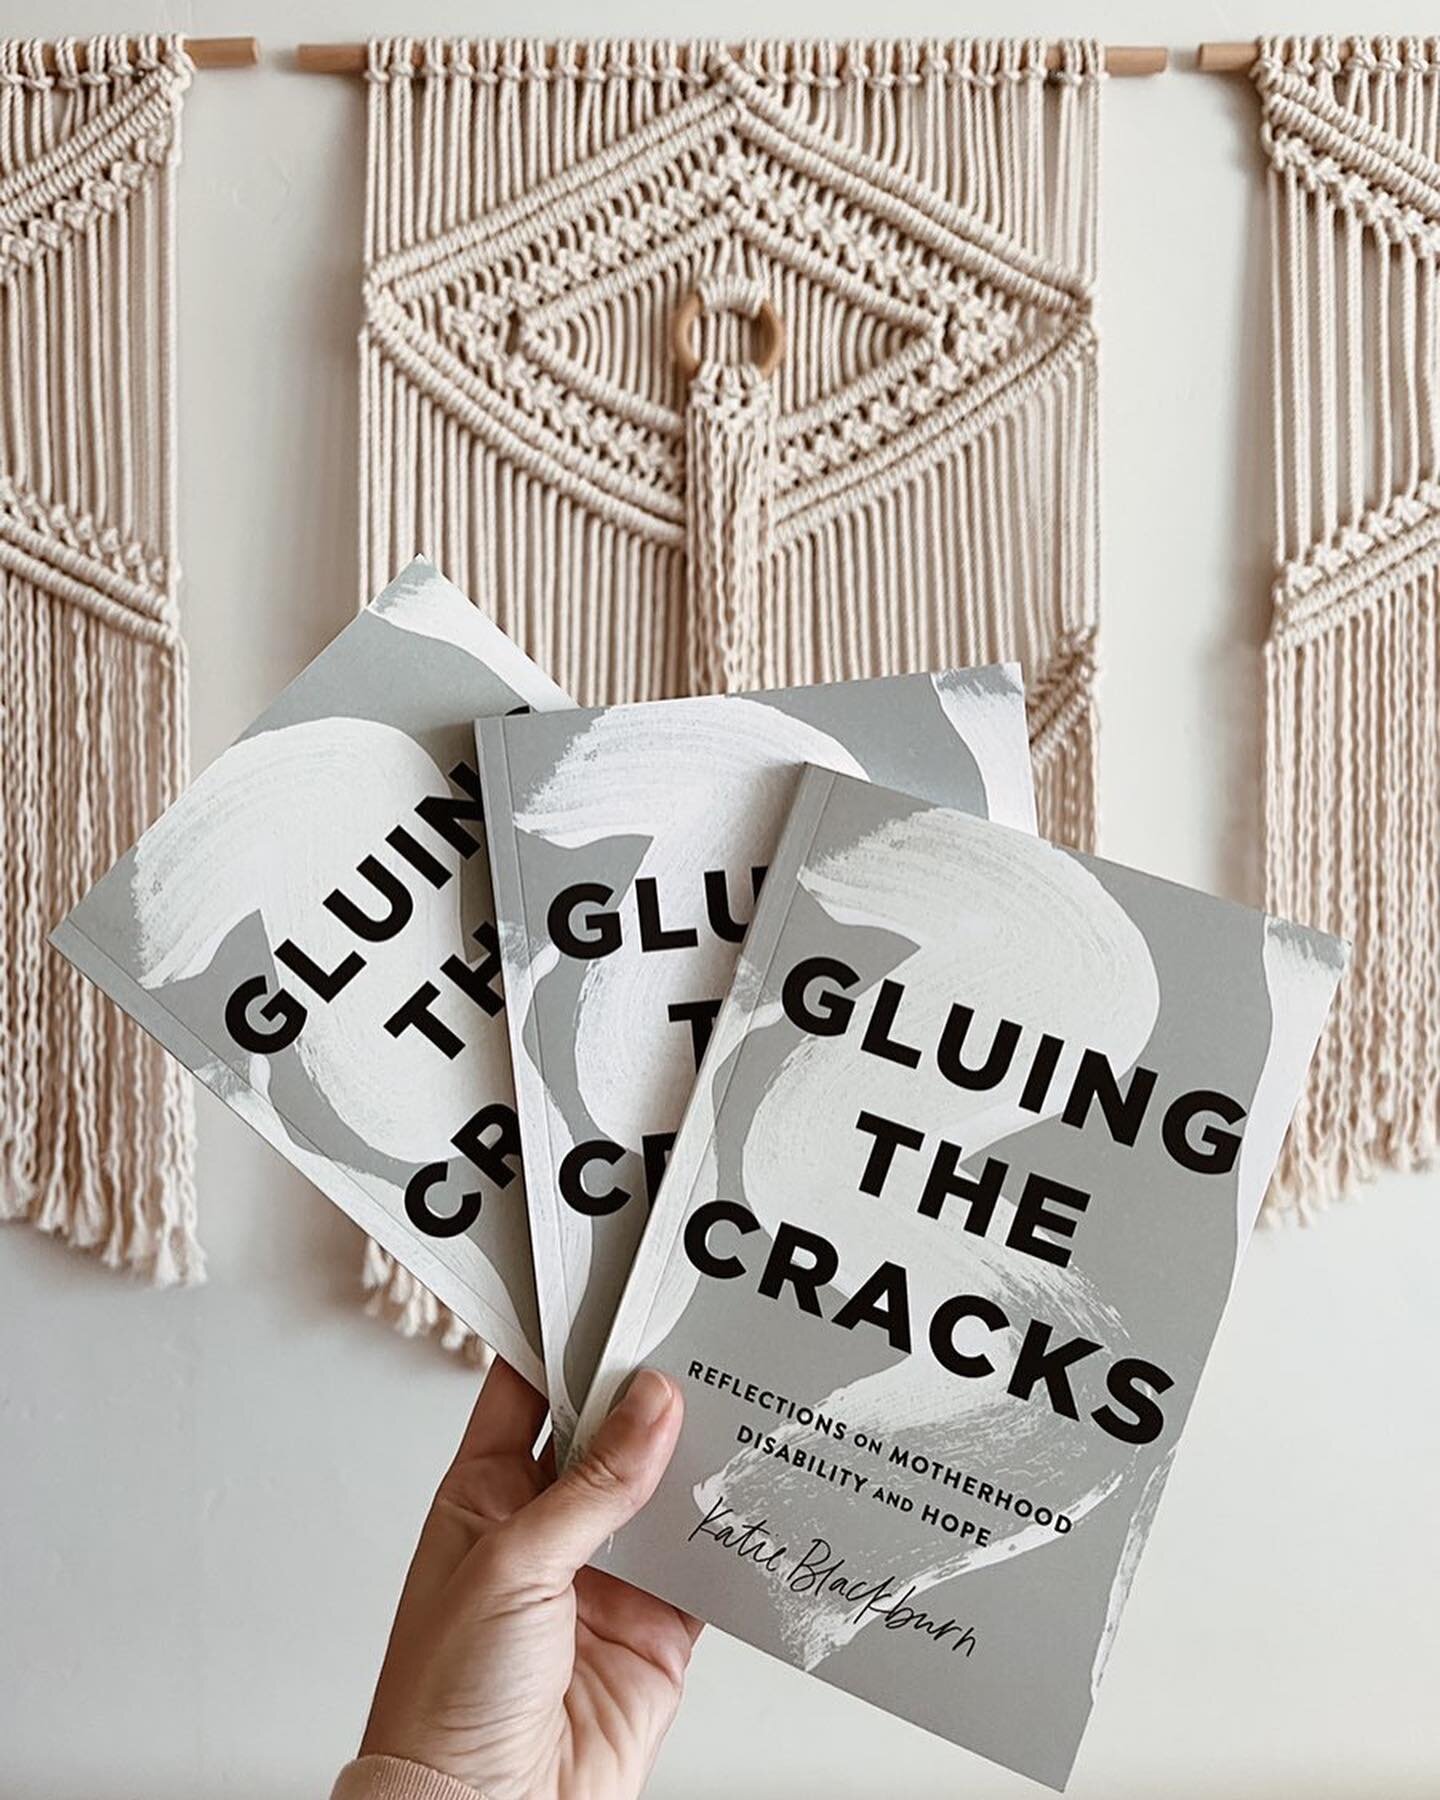 Psst, hi friends! I&rsquo;m back from a little time off the &lsquo;gram and have fun news for you&hellip;

My book, Gluing the Cracks, is ready to order 💫

🤍It&rsquo;s for you, mama, the one walking into the pediatrician with an 18-month old on you